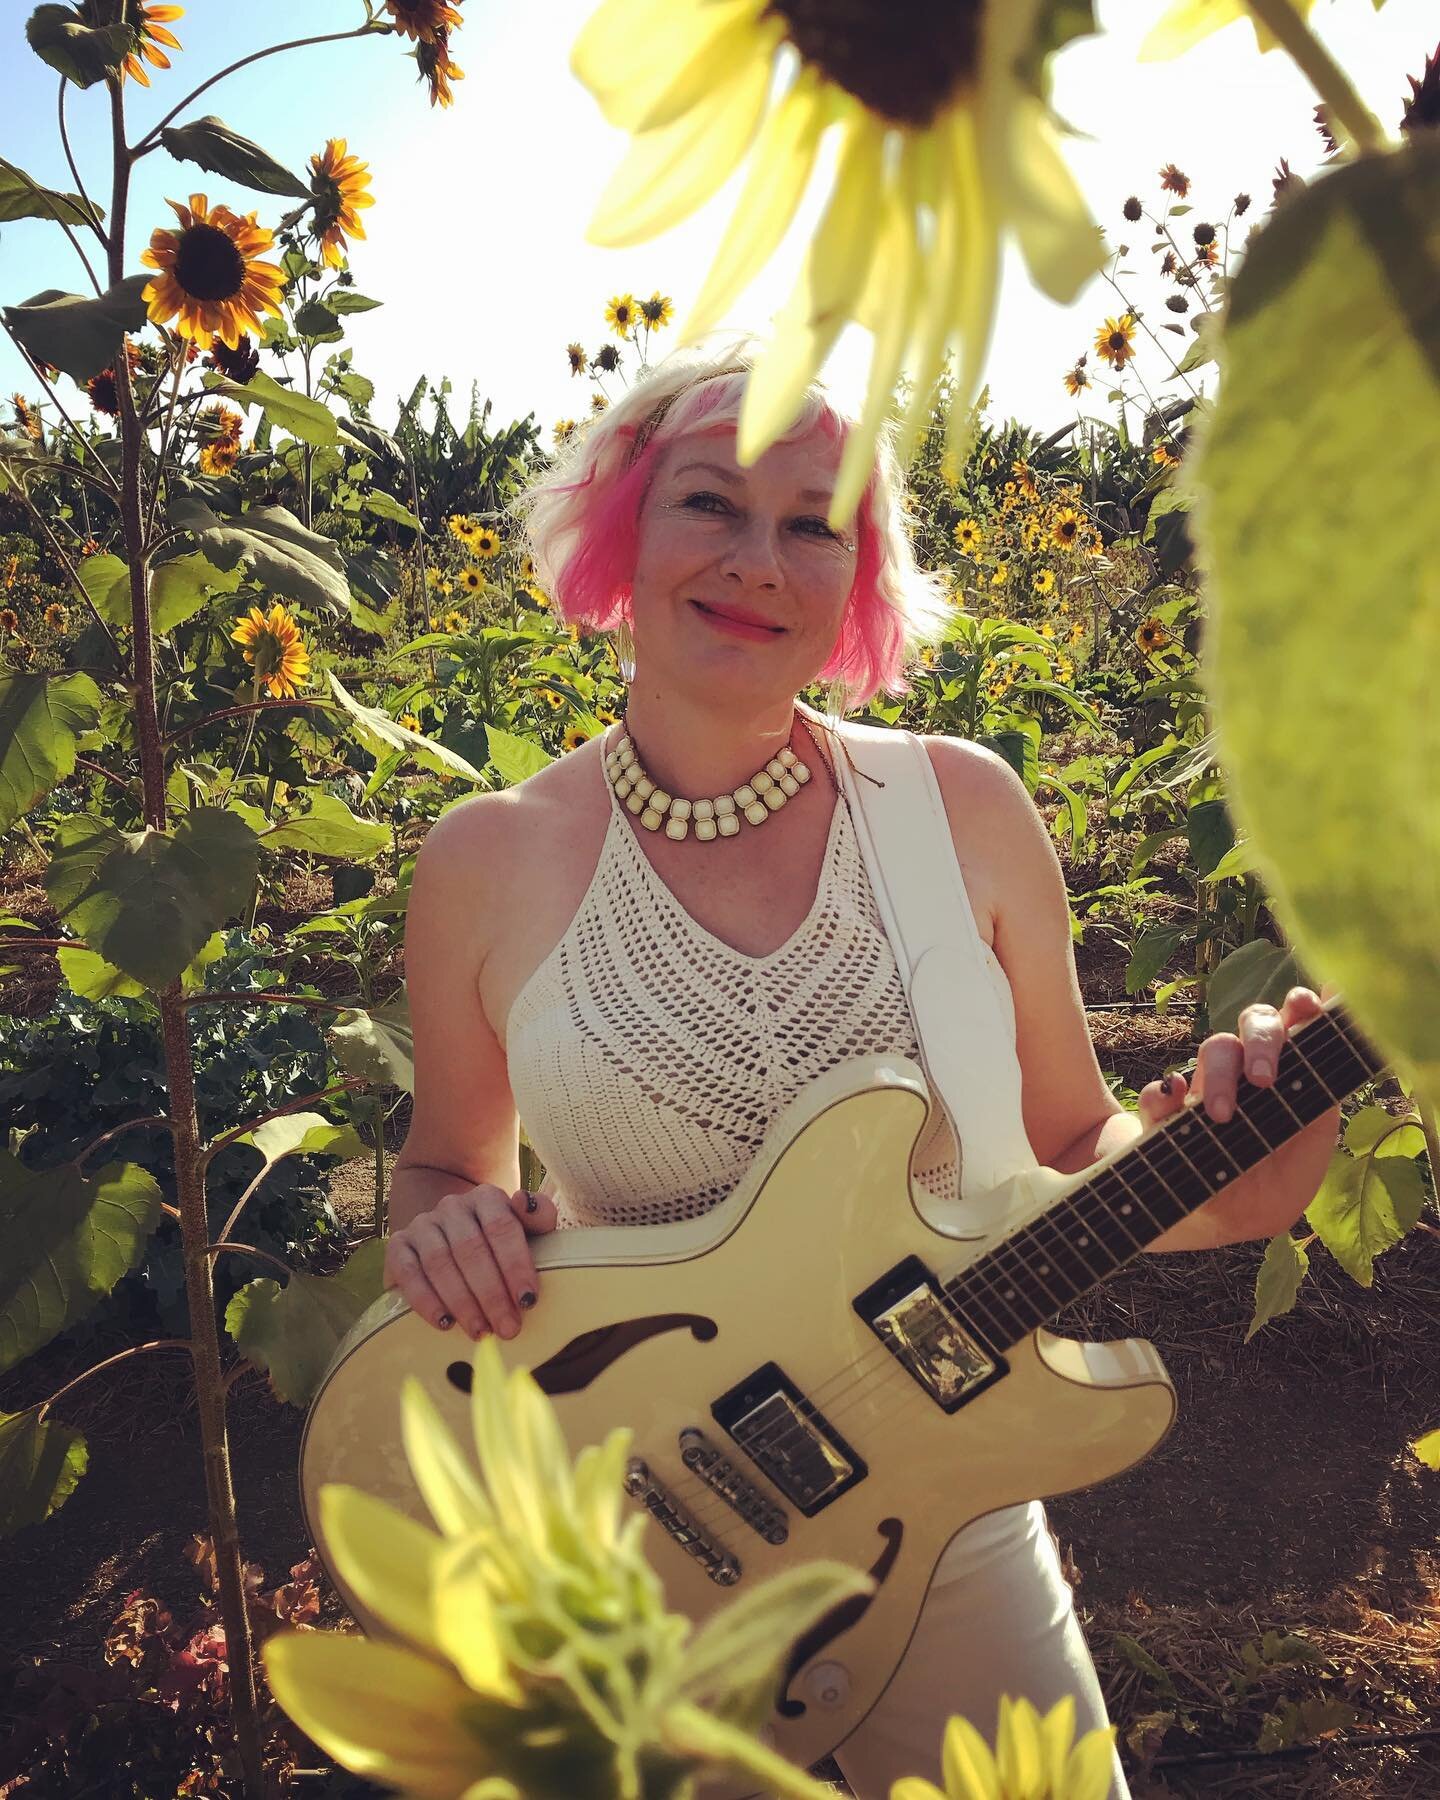 Pre-show from @florafarms songwriters sessions. Plant me among the sunflowers please. 

#florafarms #sunflowers #indierock #girasoles🌻 #songwriter